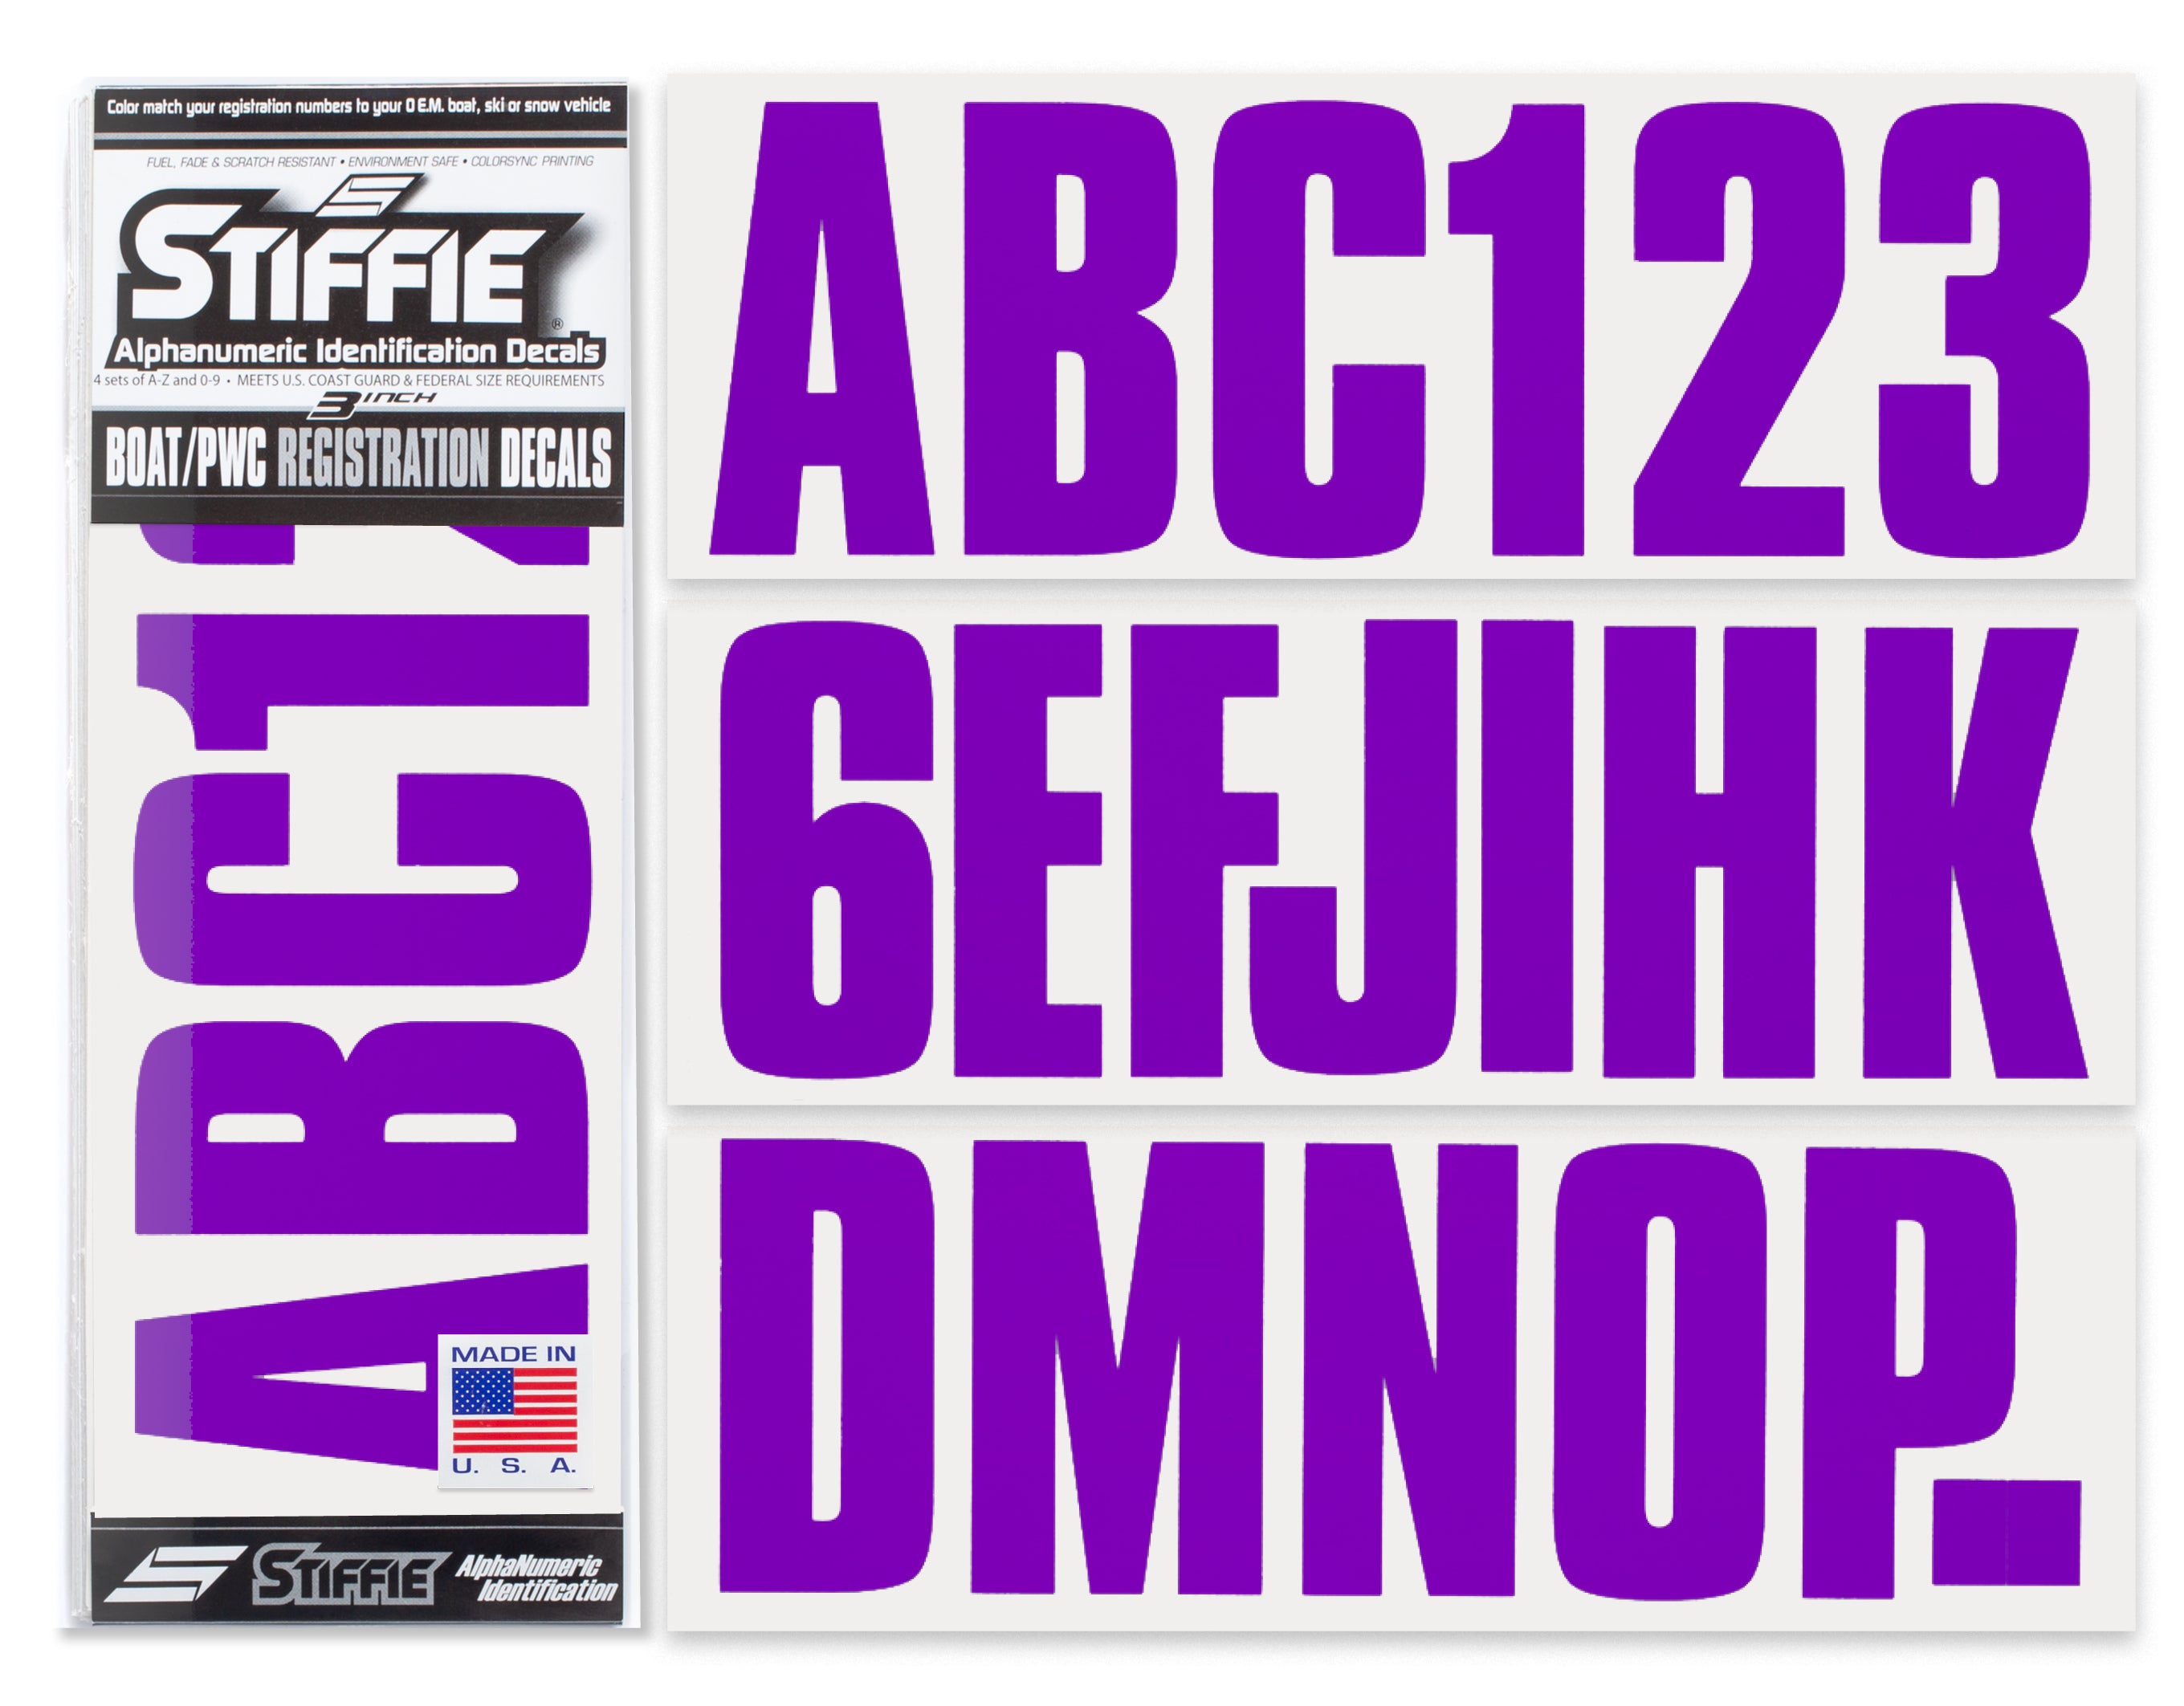 STIFFIE Uniline Purple 3" ID Kit Alpha-Numeric Registration Identification Numbers Stickers Decals for Boats & Personal Watercraft